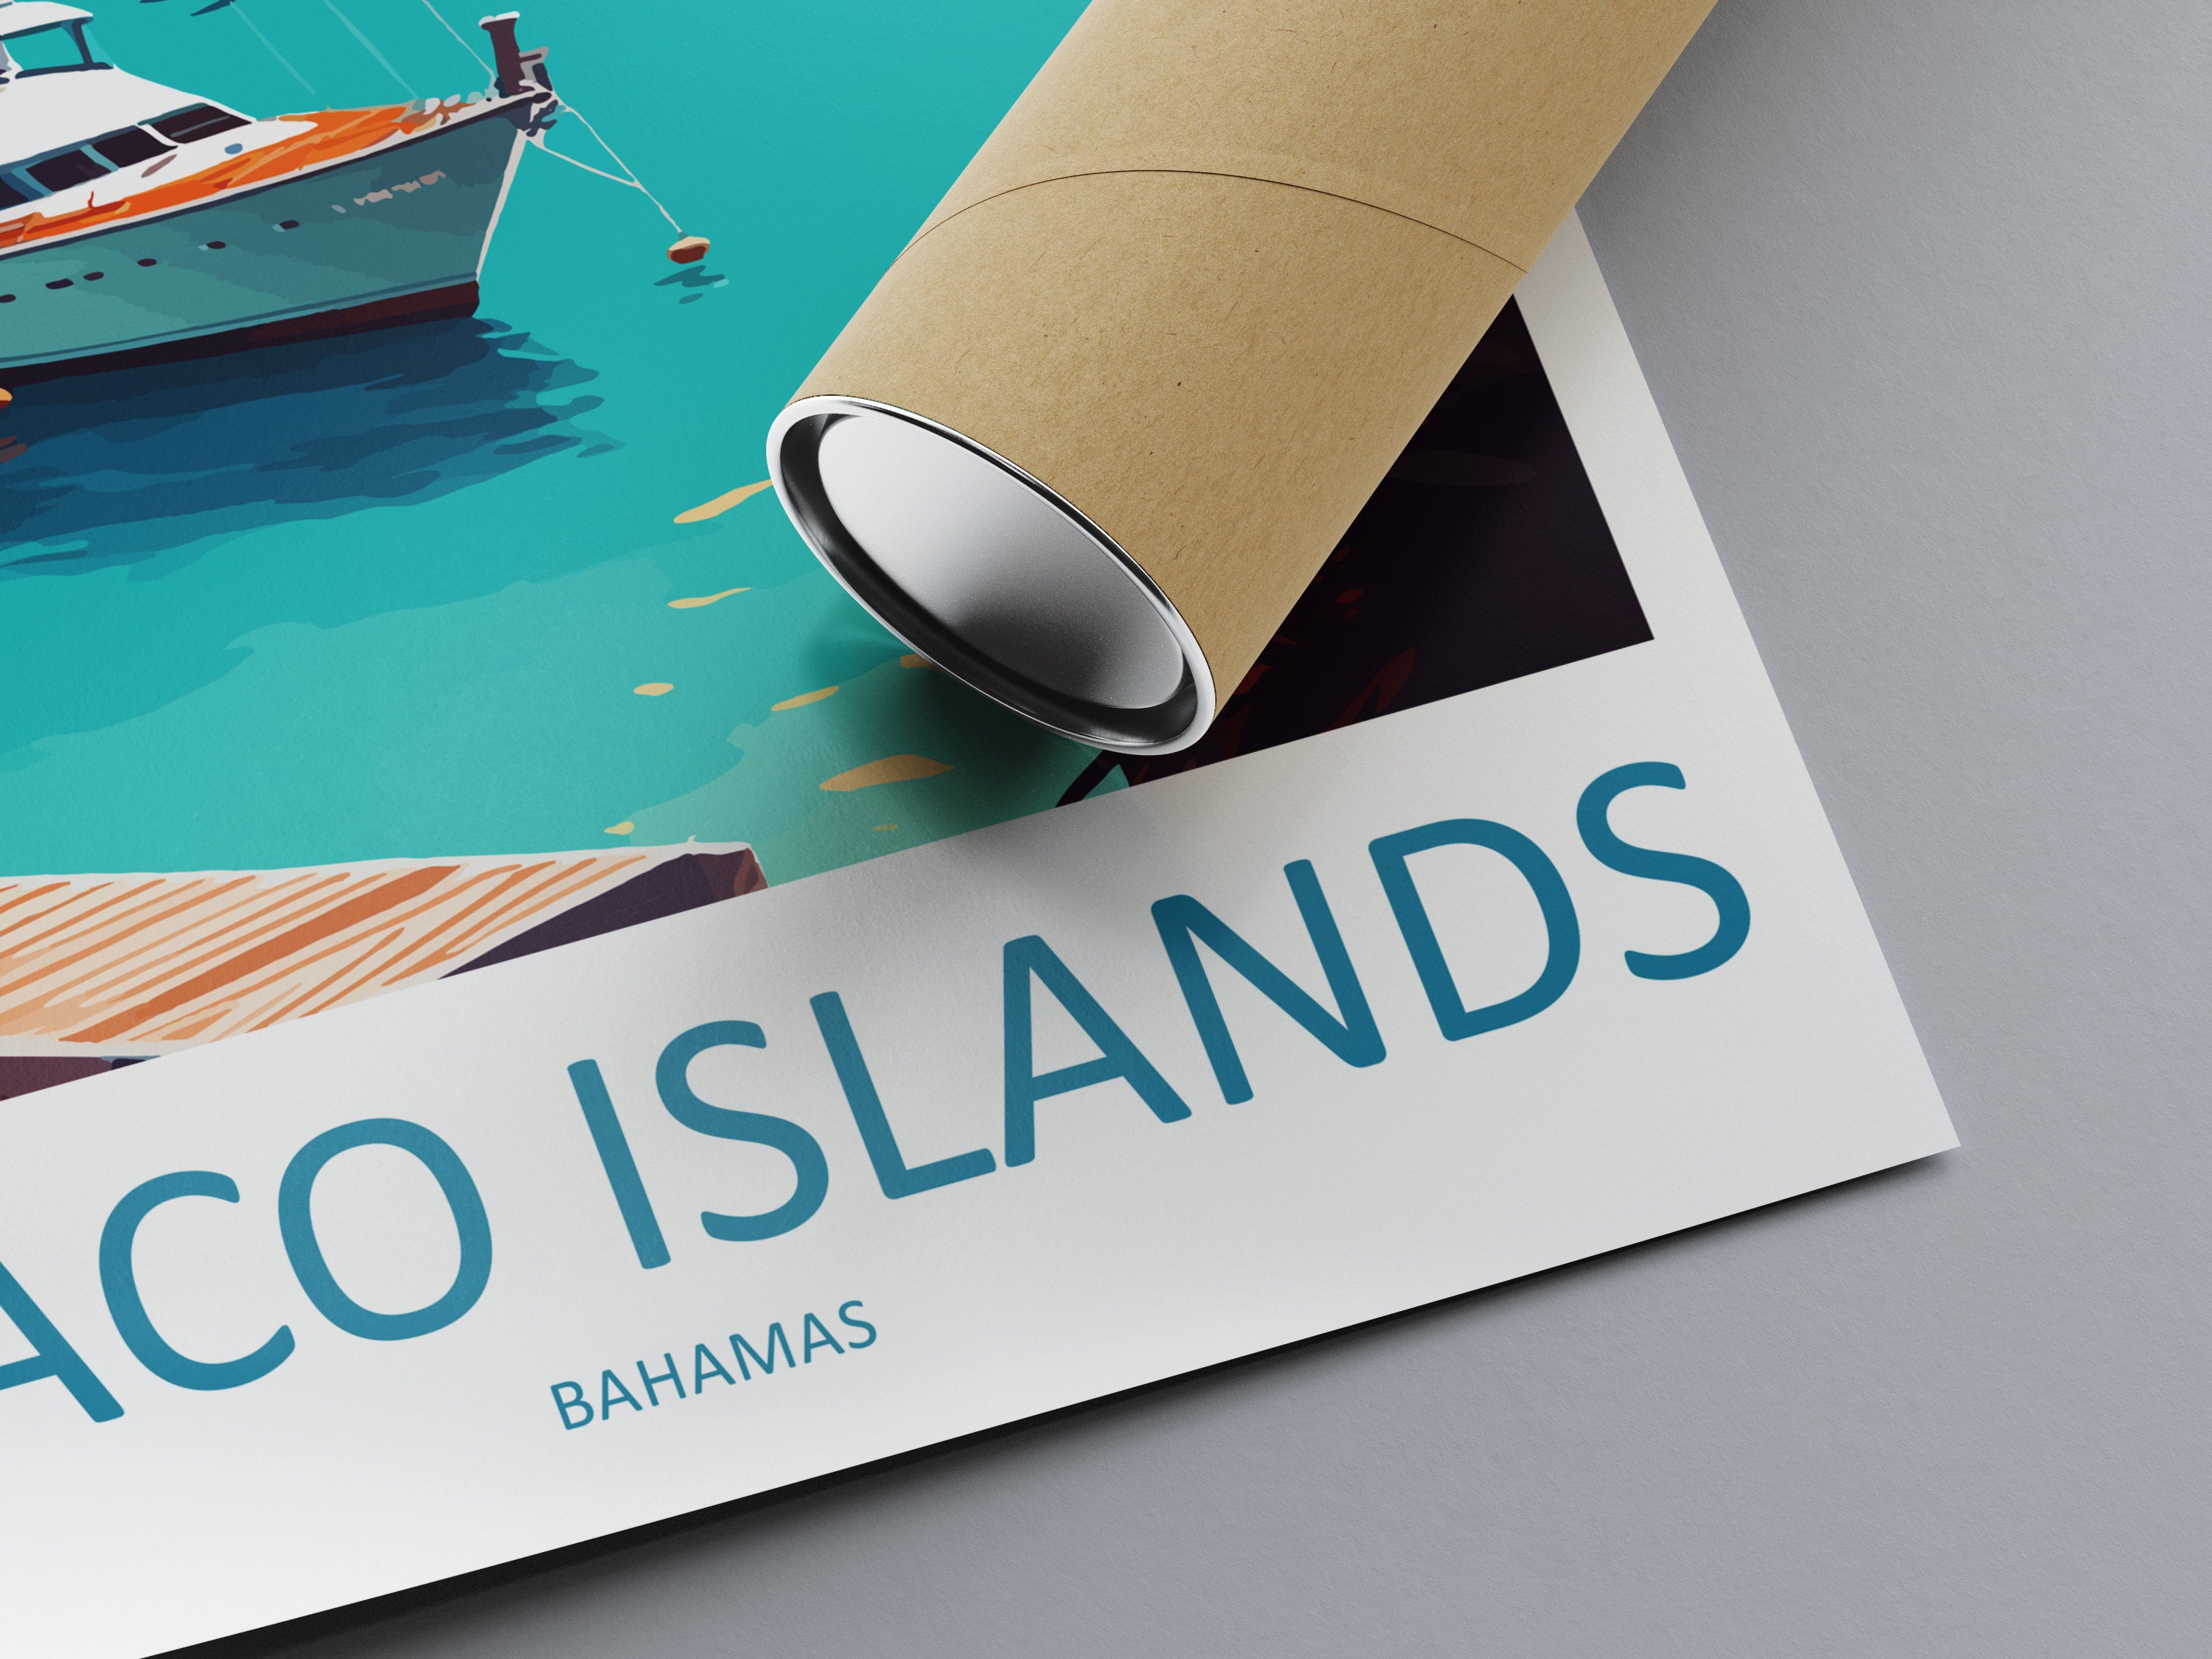 Abaco Islands Travel Print Wall Art Abaco Islands Wall Hanging Home Décor Abaco Islands Gift Art Lovers Wall Art Caribbean Travel Print